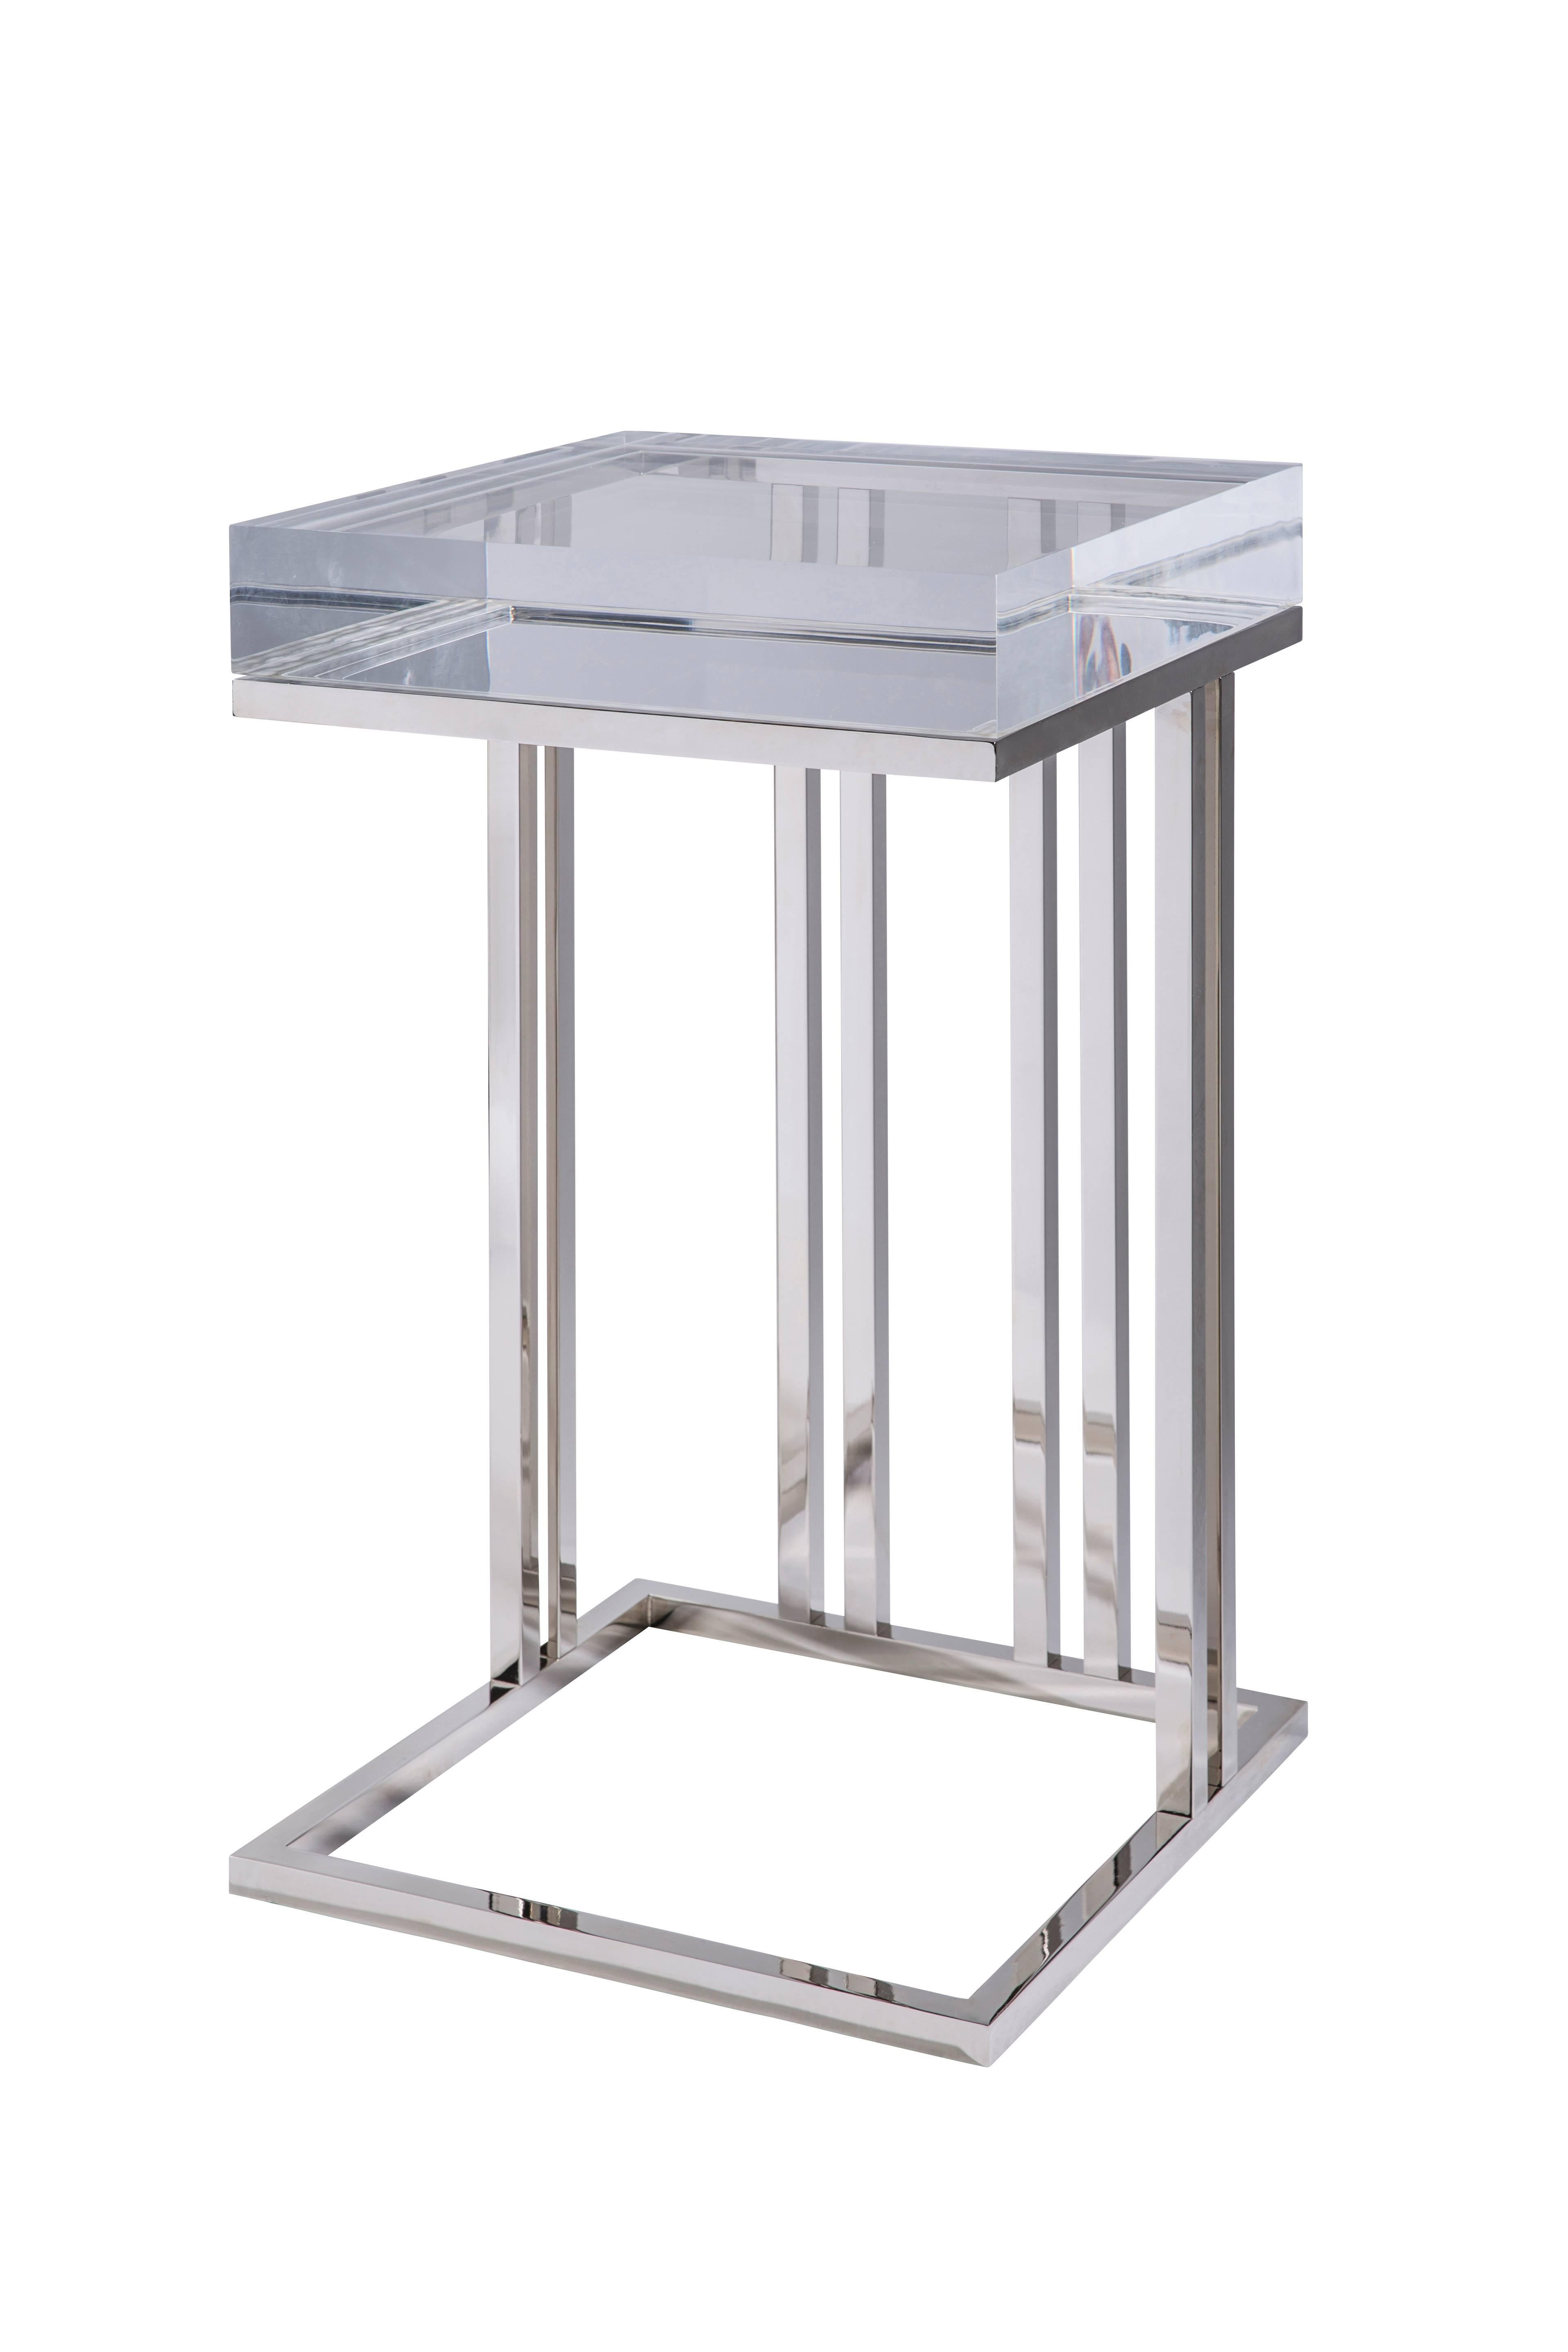 Beautiful acrylic side table
designed by Michael Dawkins.
100% Made in Italy.
Custom sizes available.